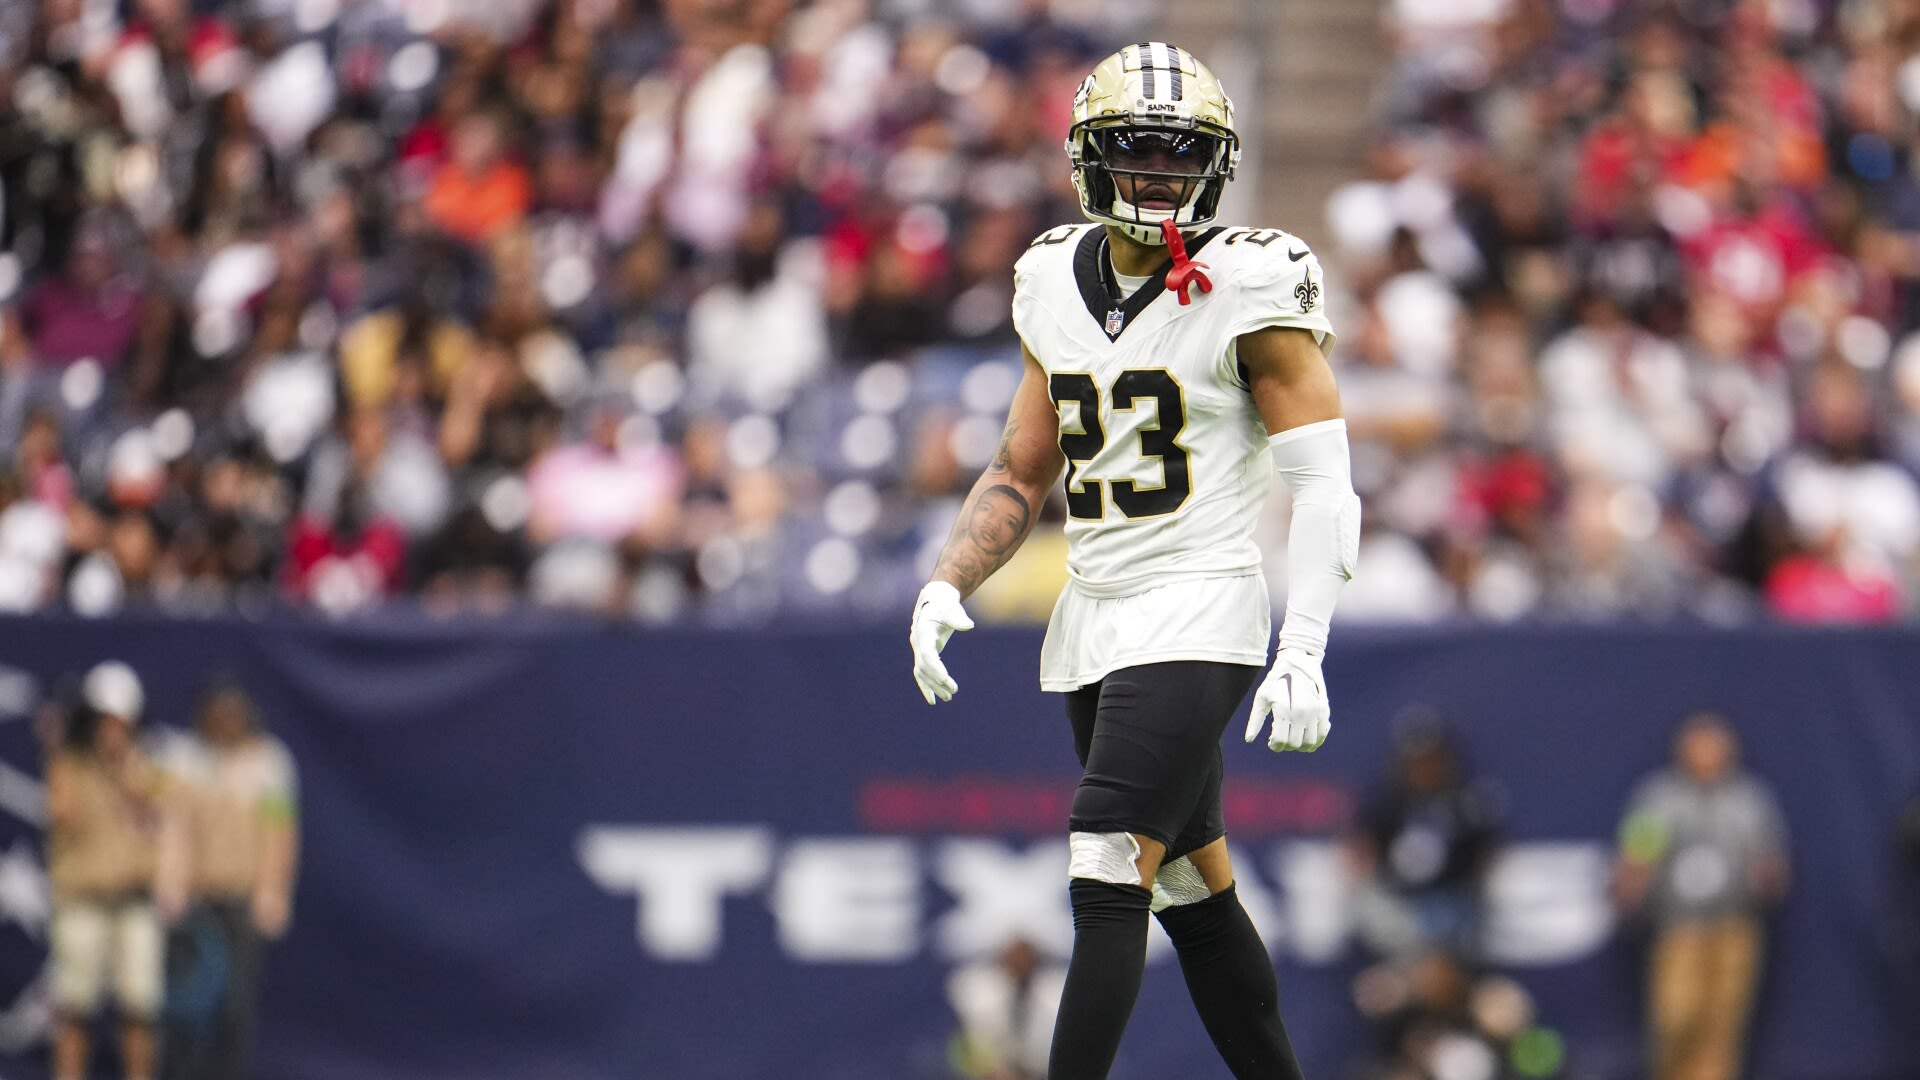 Marshon Lattimore: "No problem" with trade chatter, have to prove I'm same player